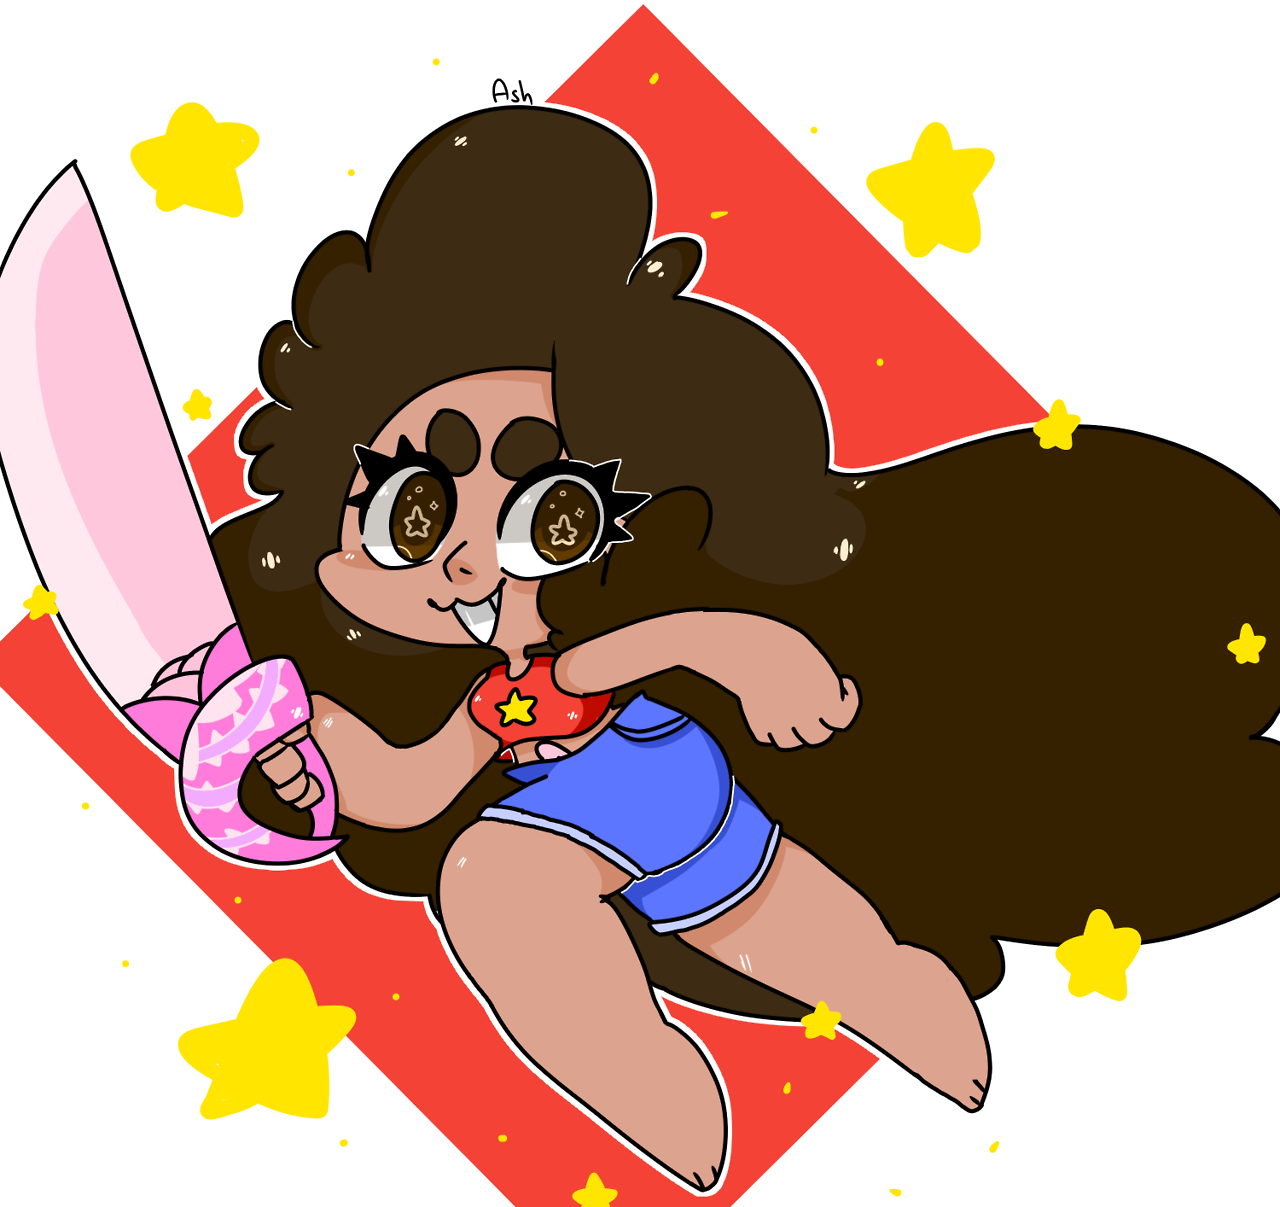 Stevonnie fanart! Fusion of awesomeness! Art by me!